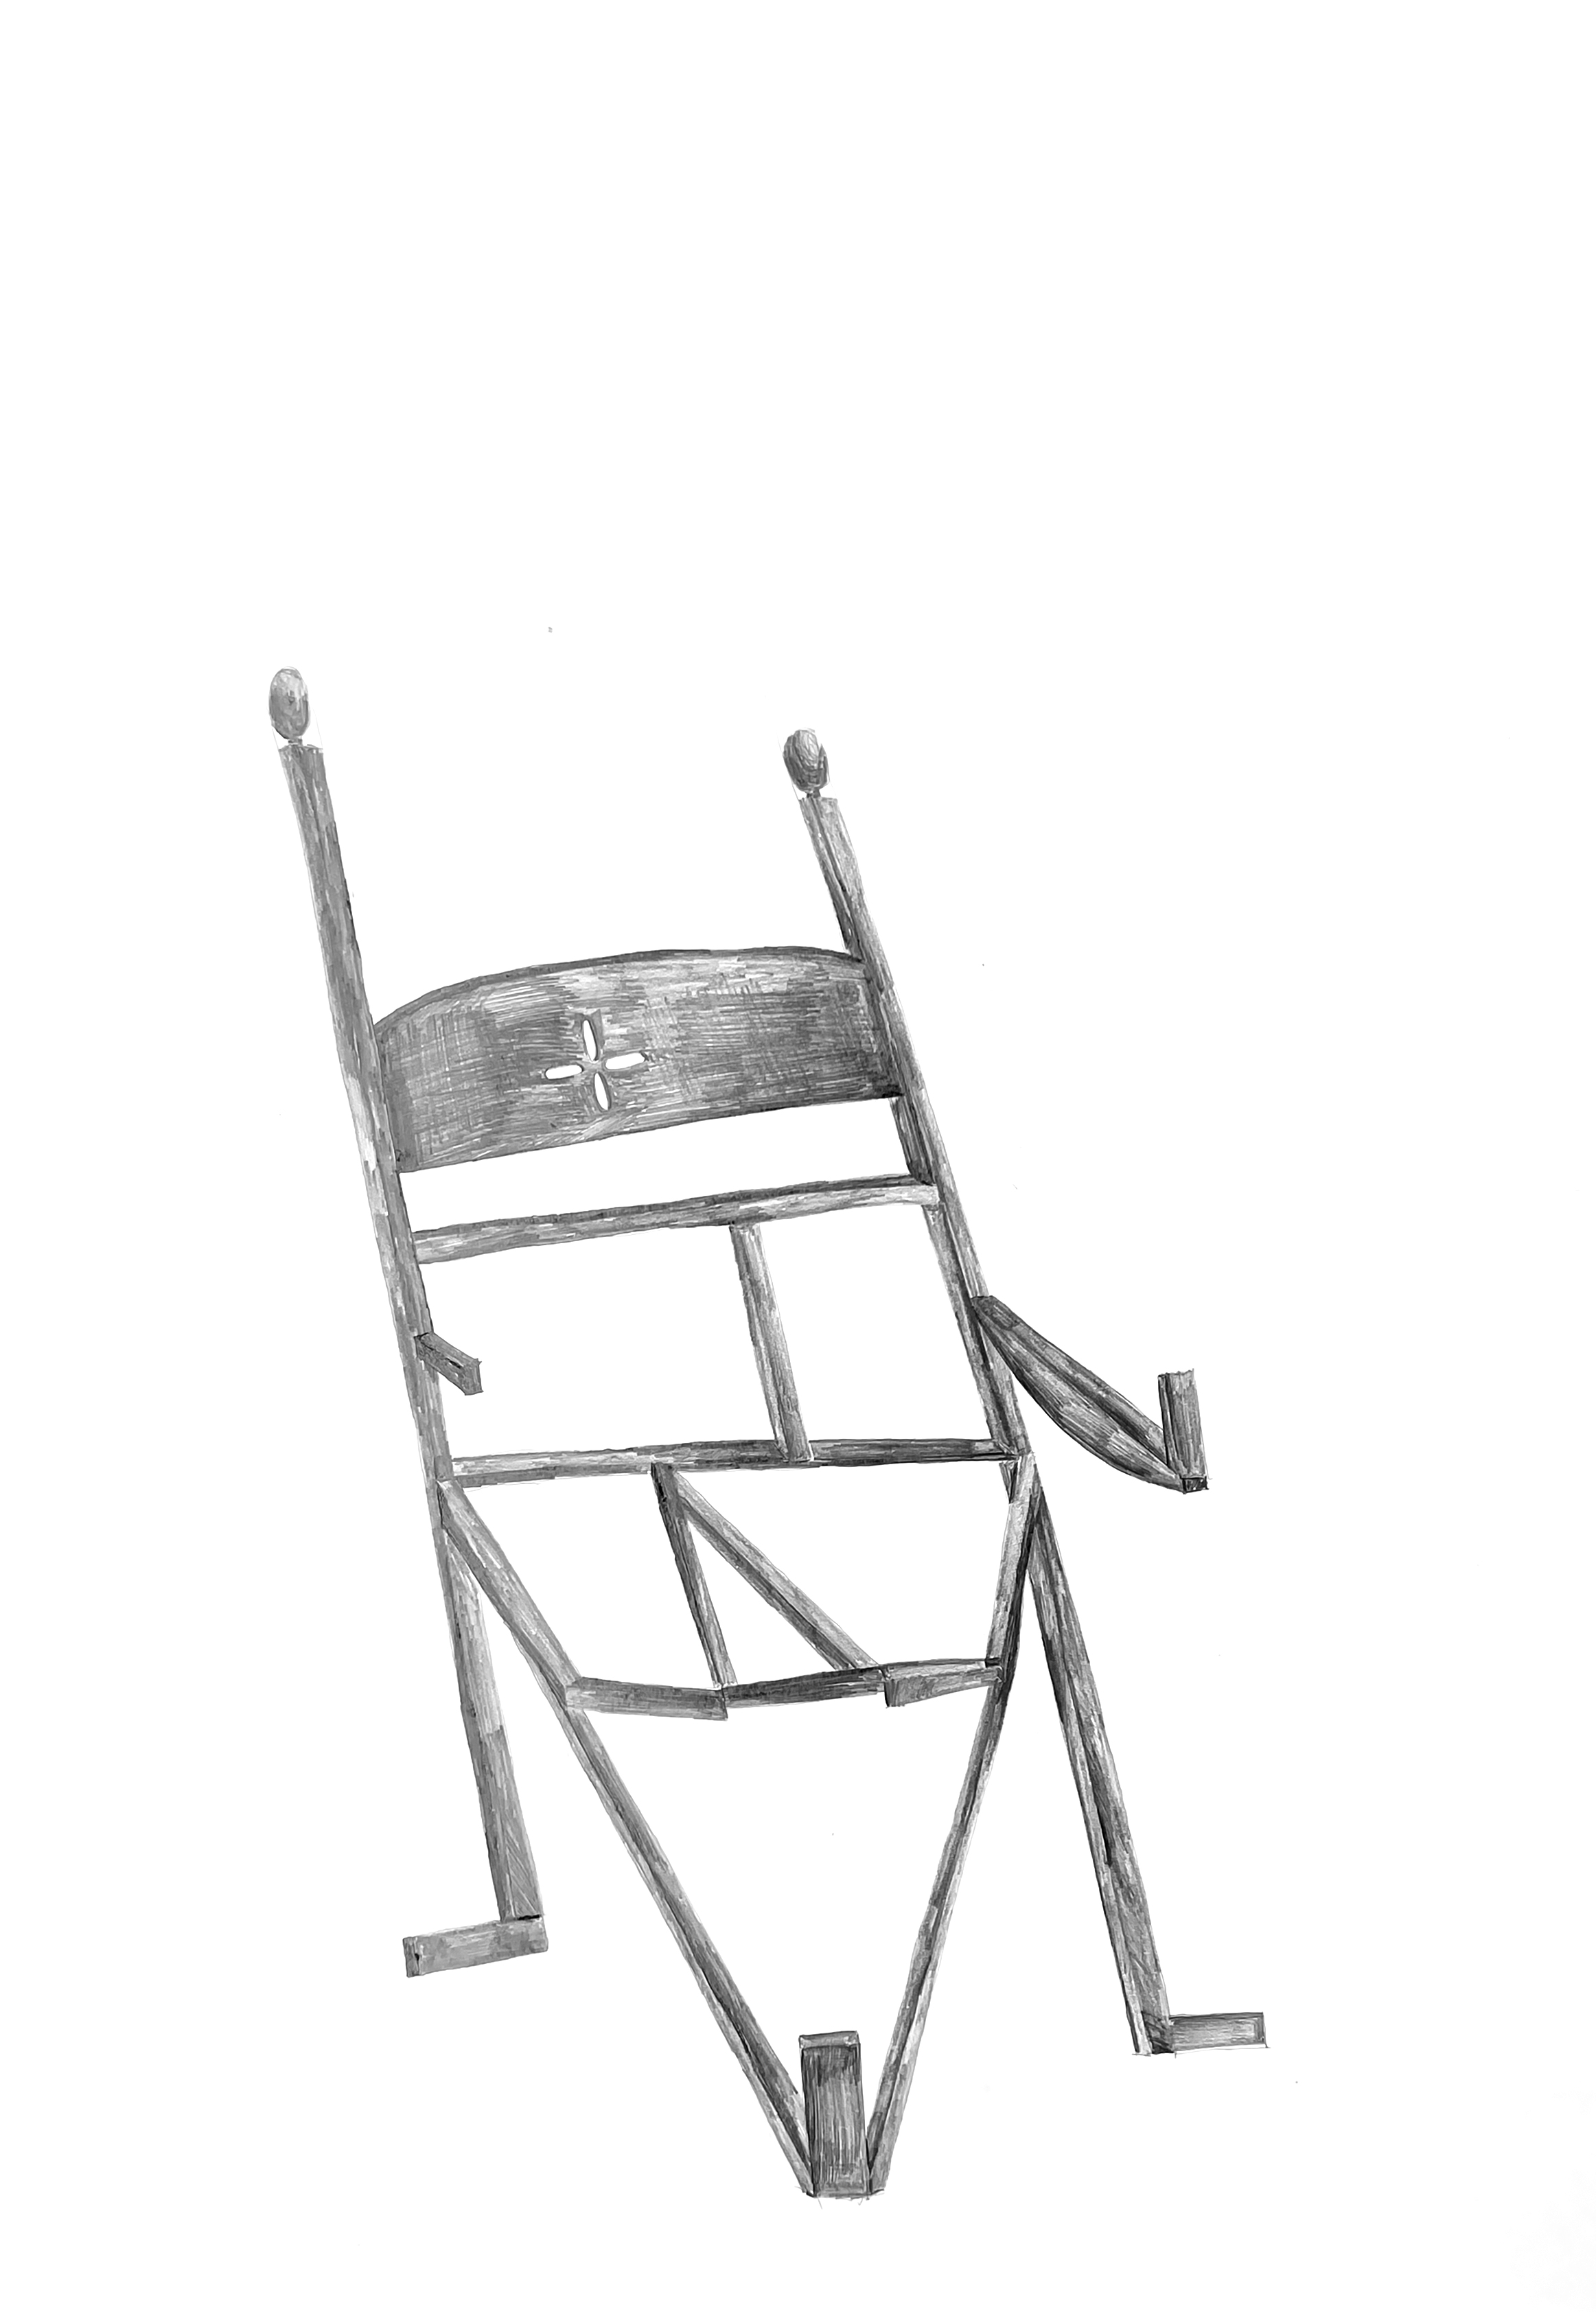 pencil drawing of a chair with three legs and no seat